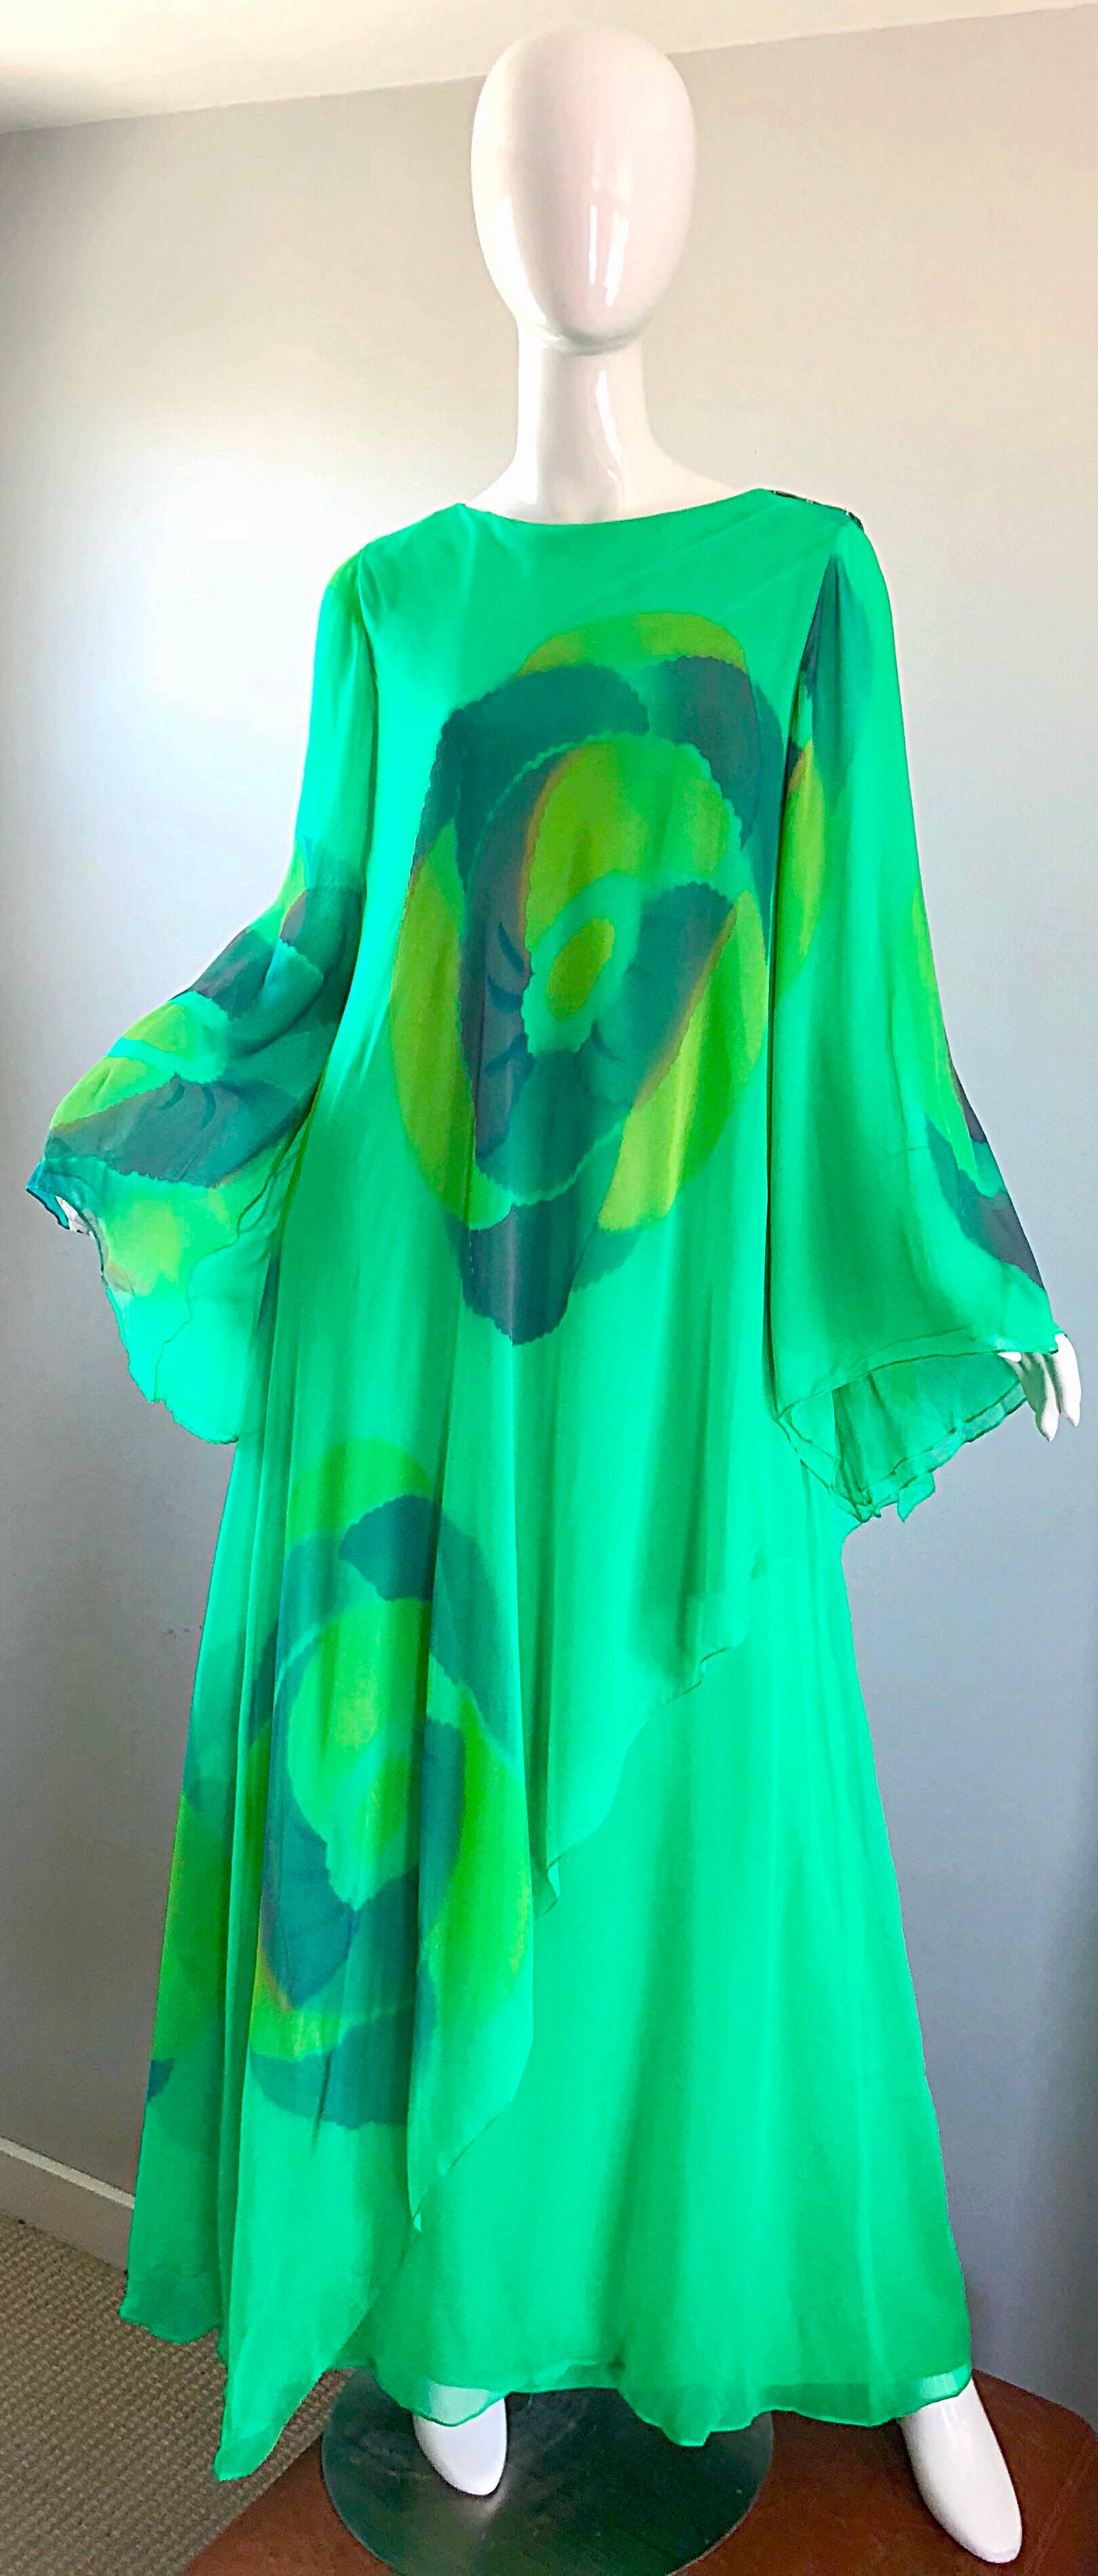 Absolutely stunning 1970s TRAVILLIA hand painted kelly green caftan gown! Features layers upon layers of the finest silk chiffon. Hand painted watercolor prints throughout the front, back and sleeves. Forgiving loose fit drapes the body